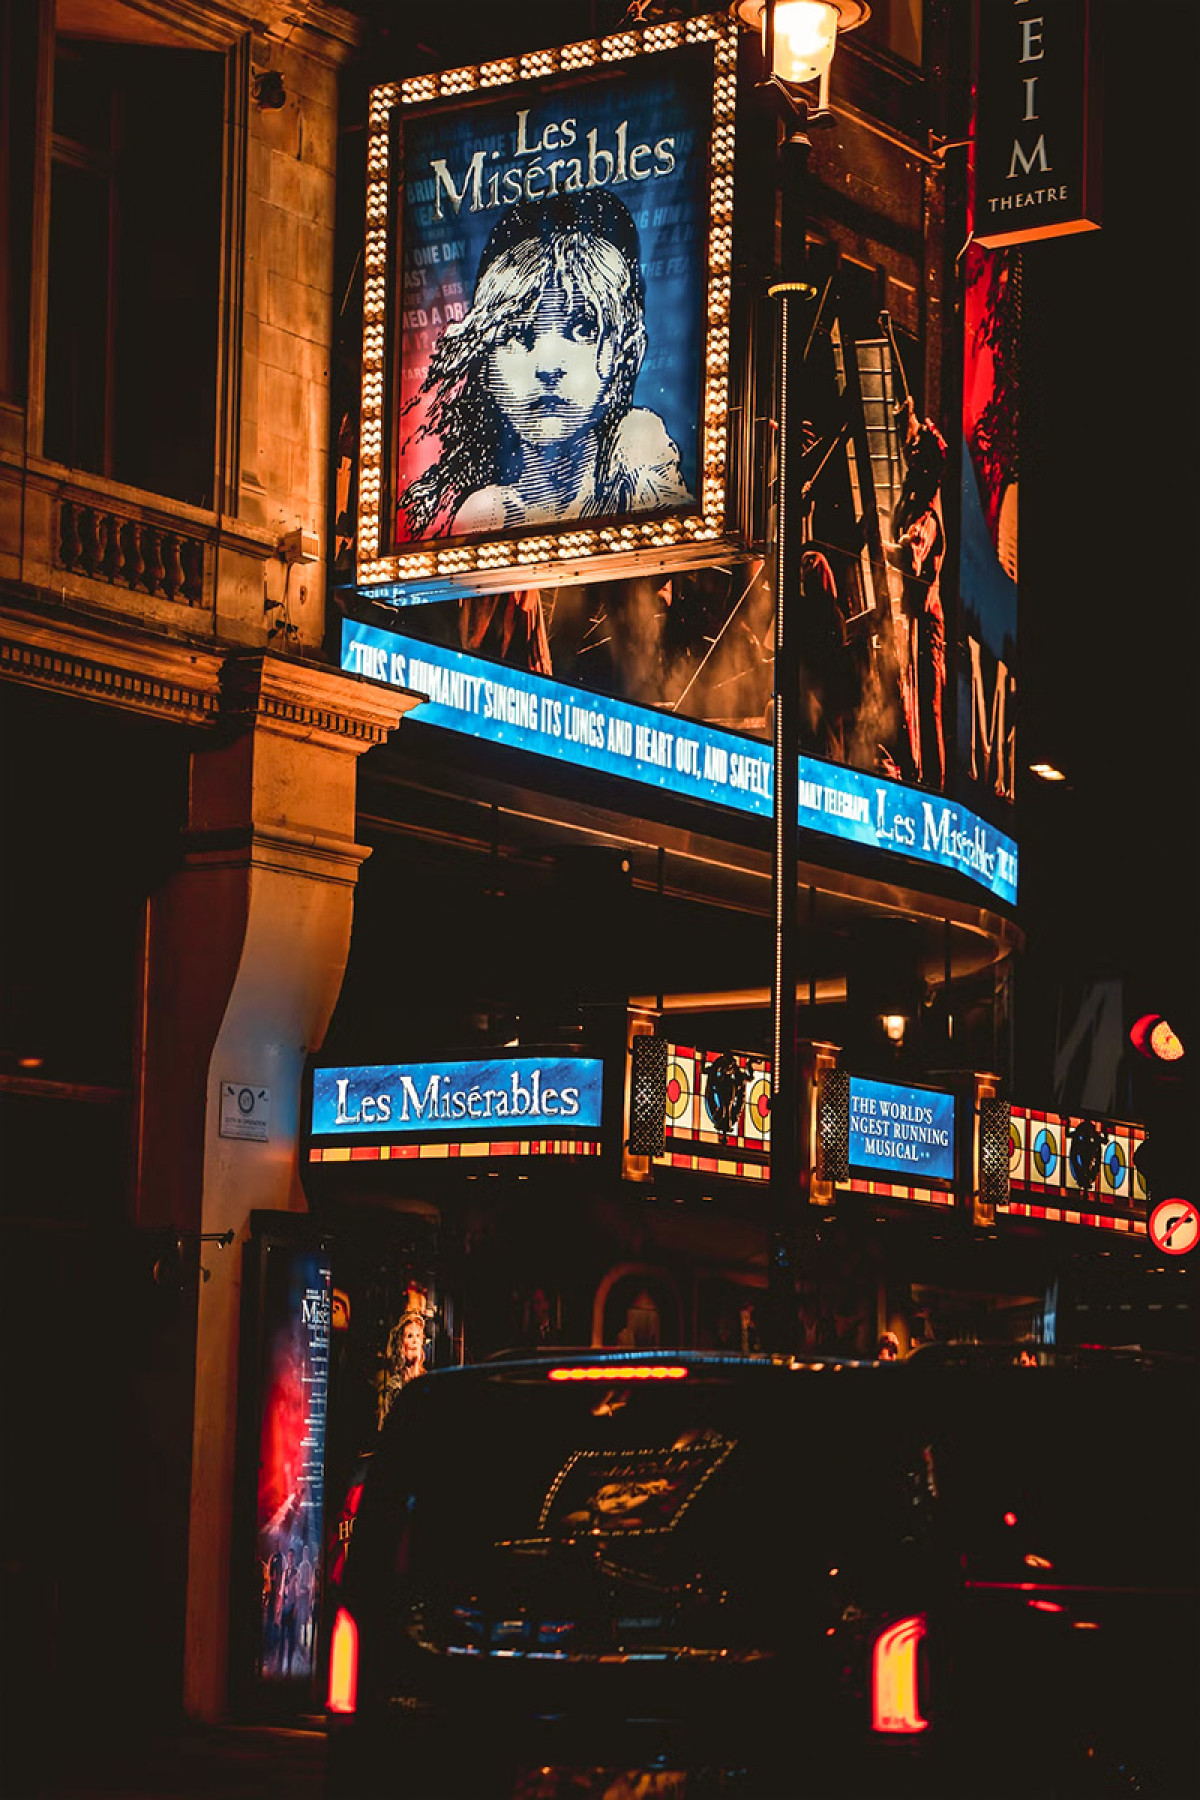 London West End theatre at night